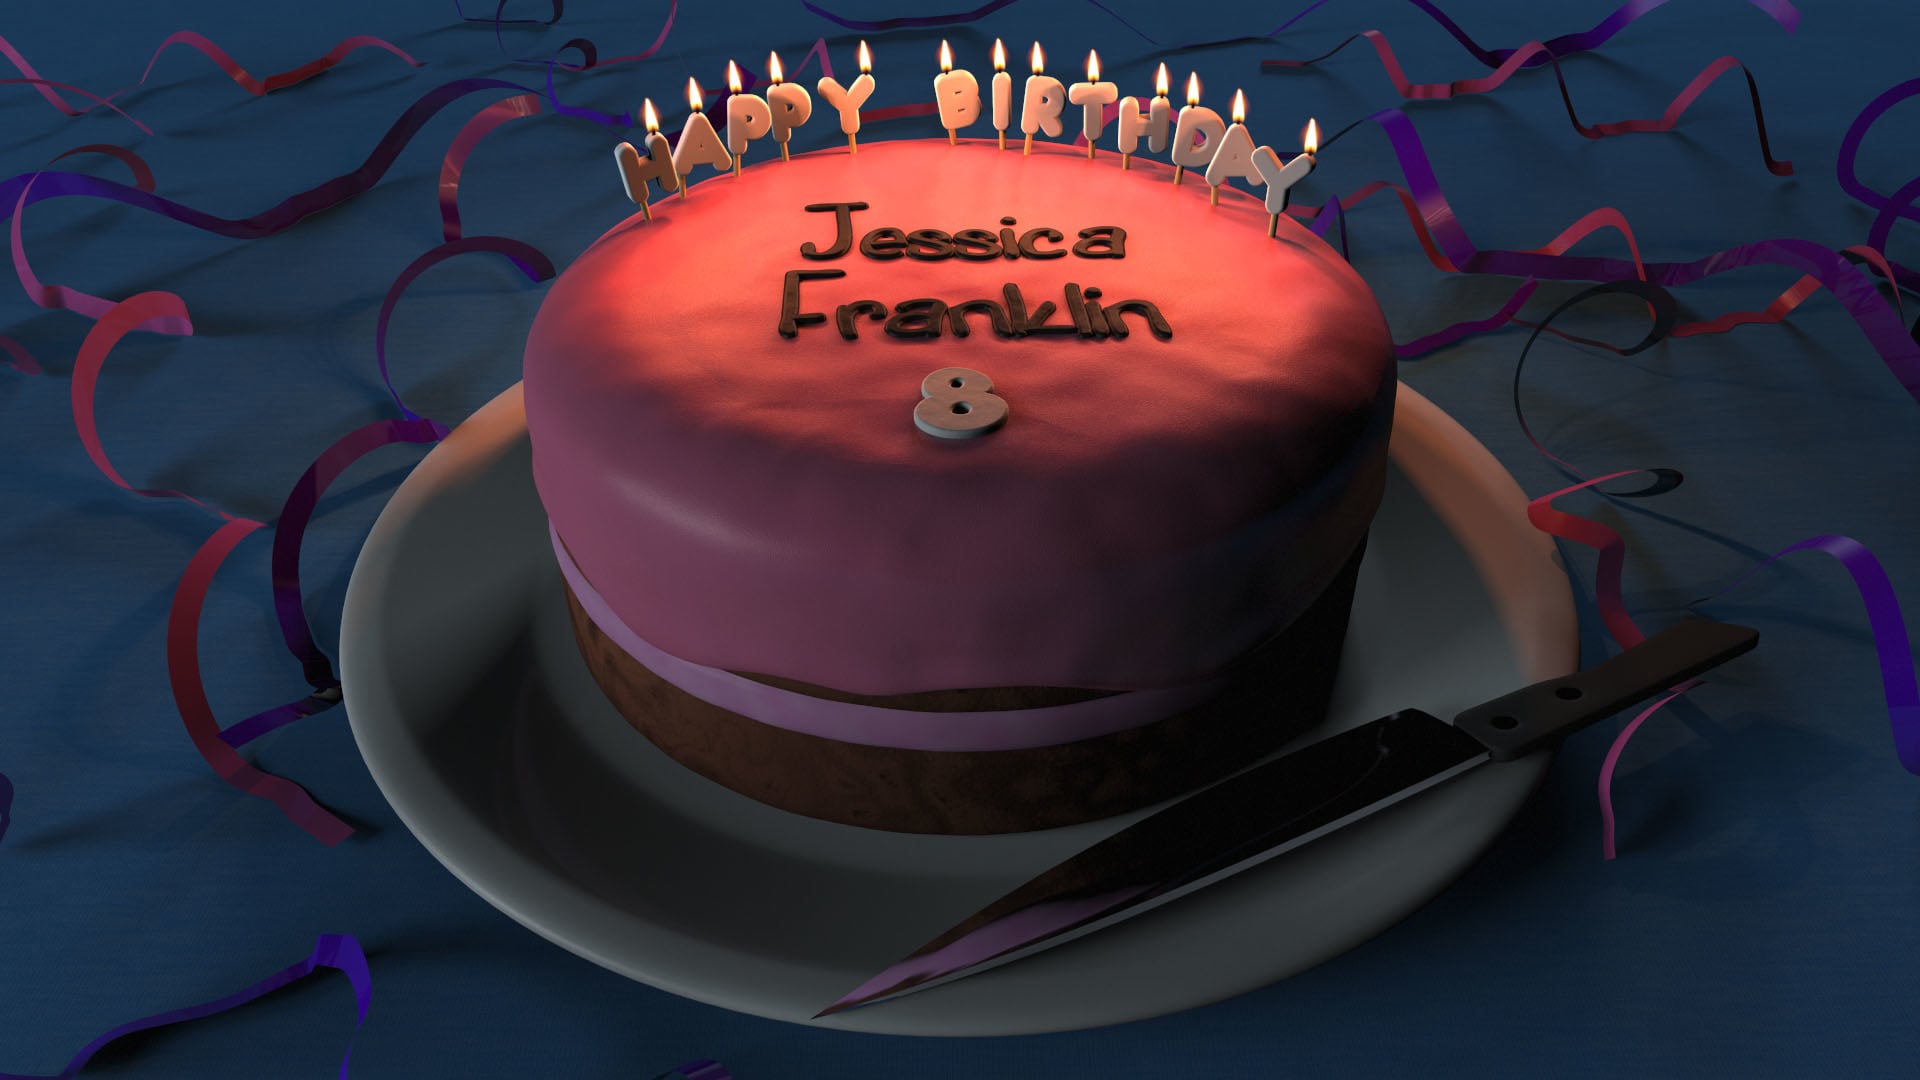 Create a personalized 3d birthday cake image by Omniflair | Fiverr